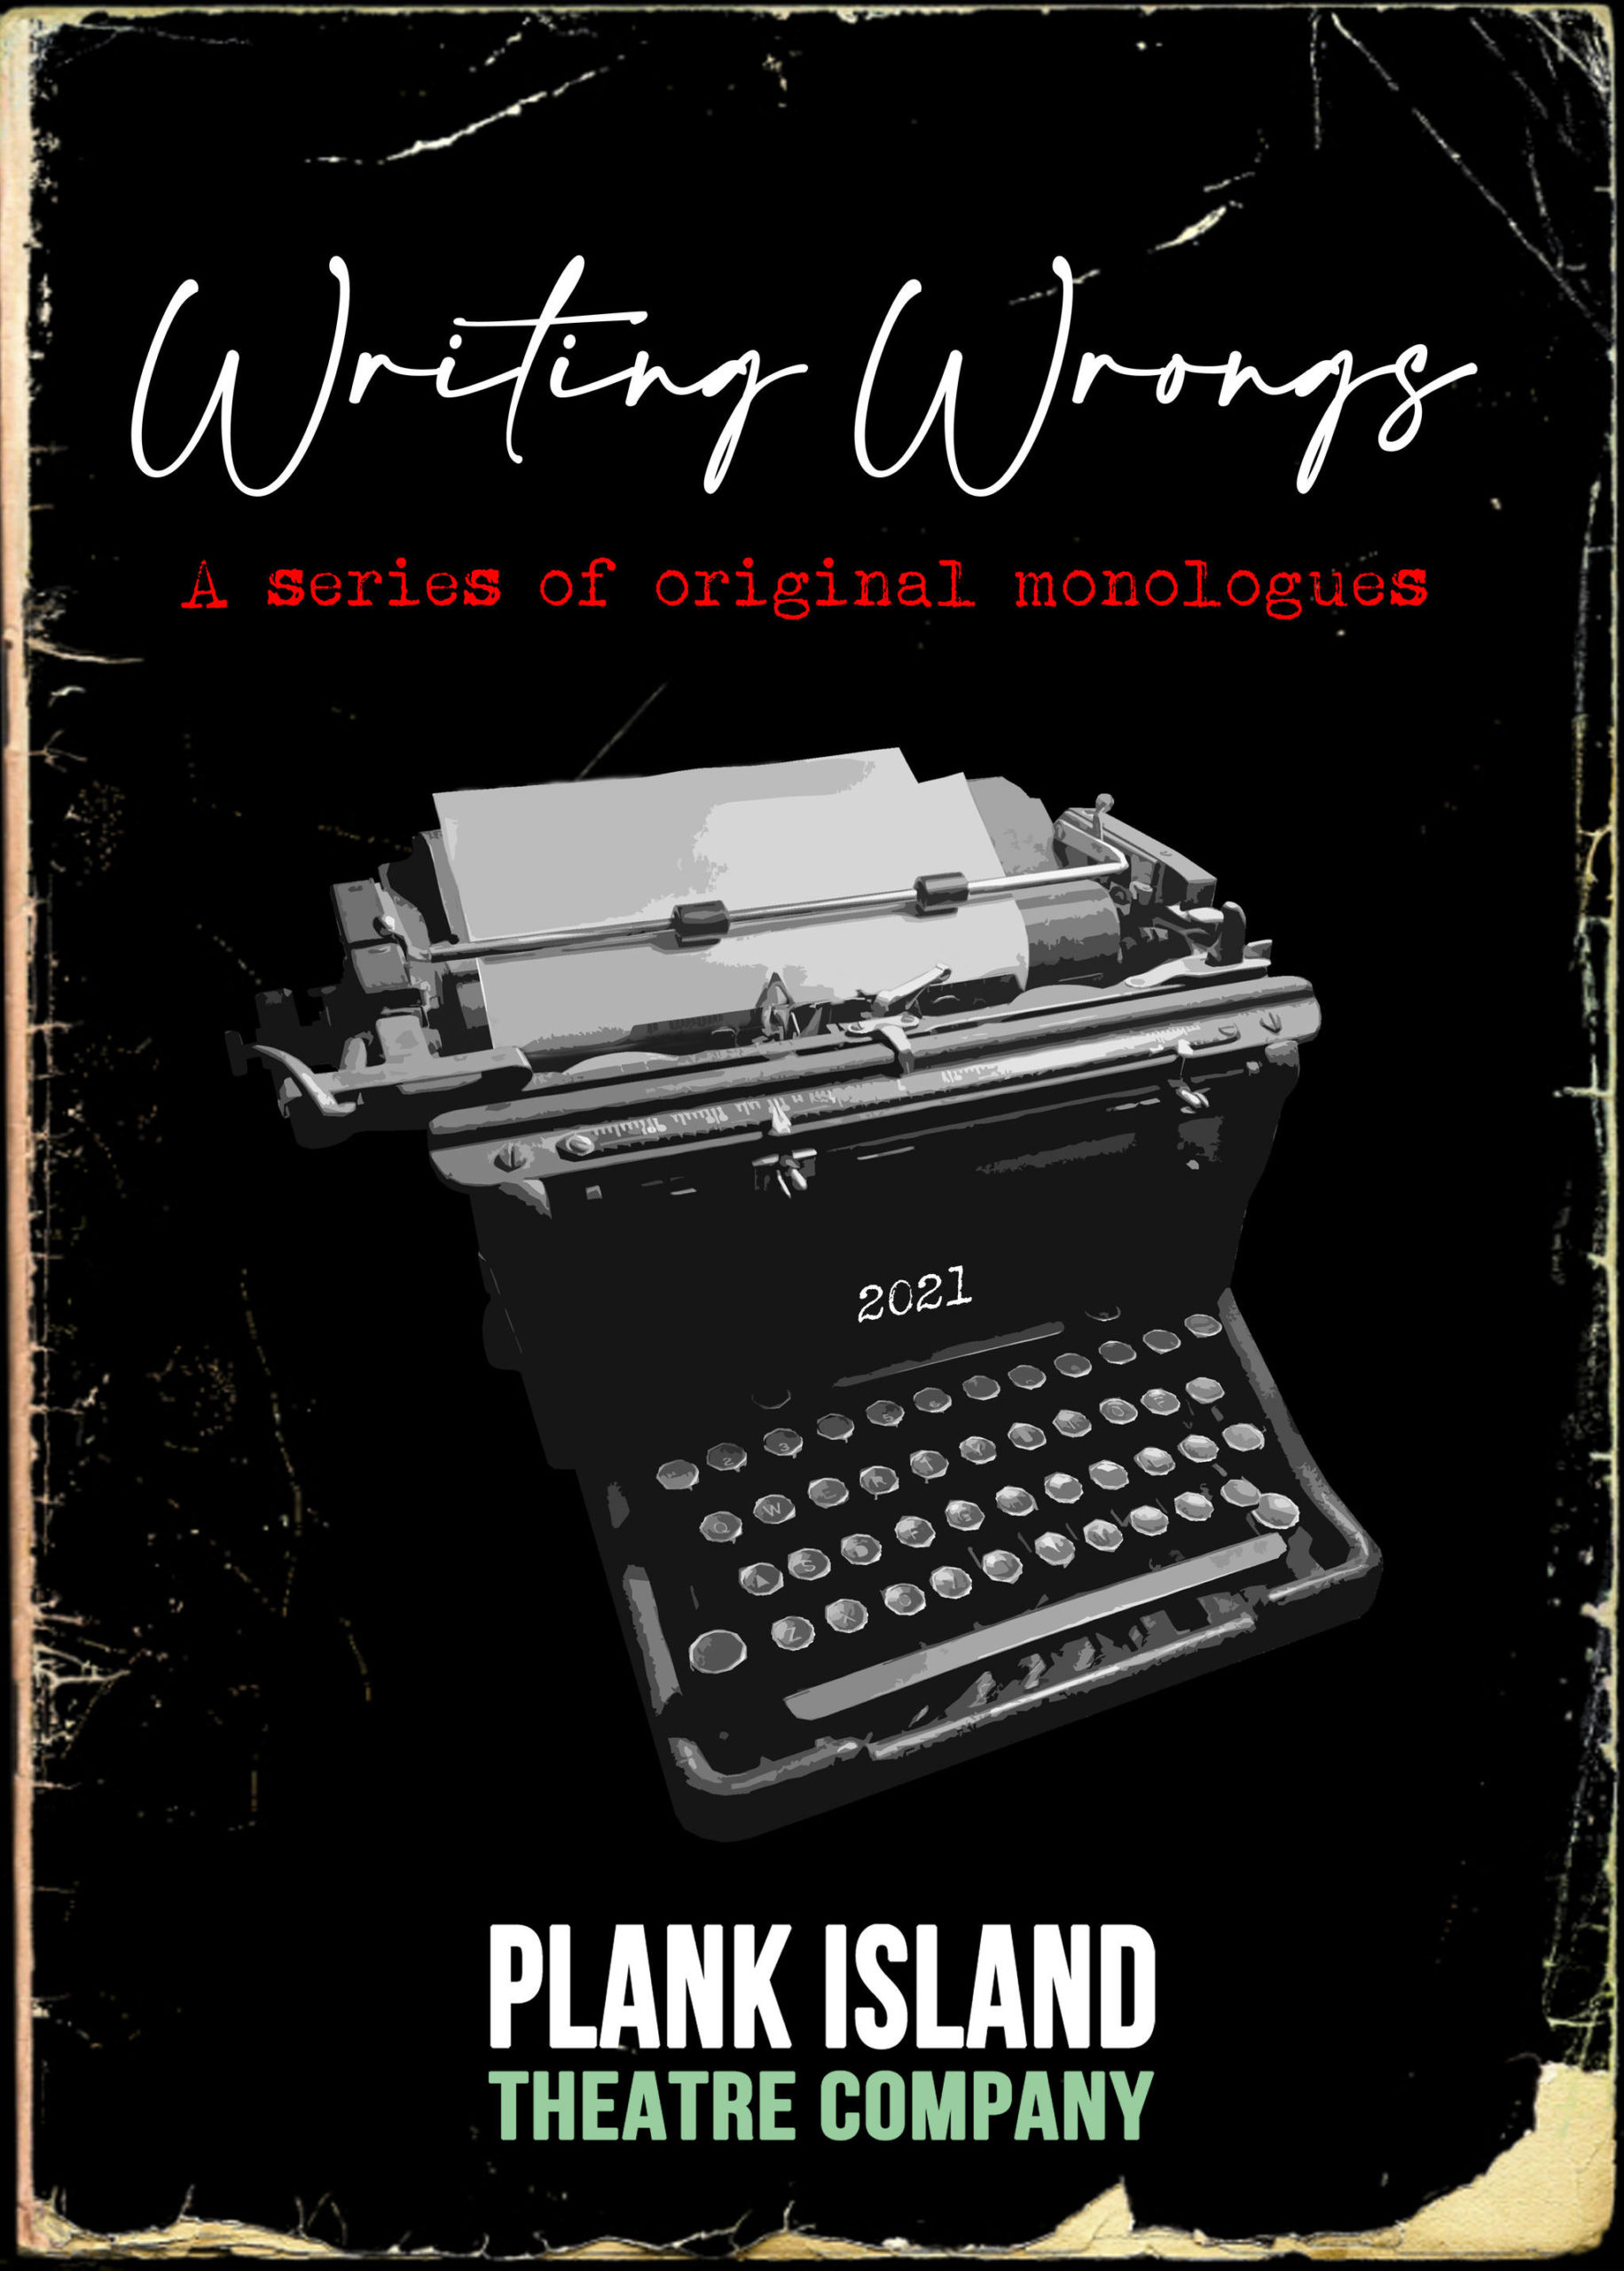 Auditions for Writing Wrongs begin May 24 
(Courtesy Photo)